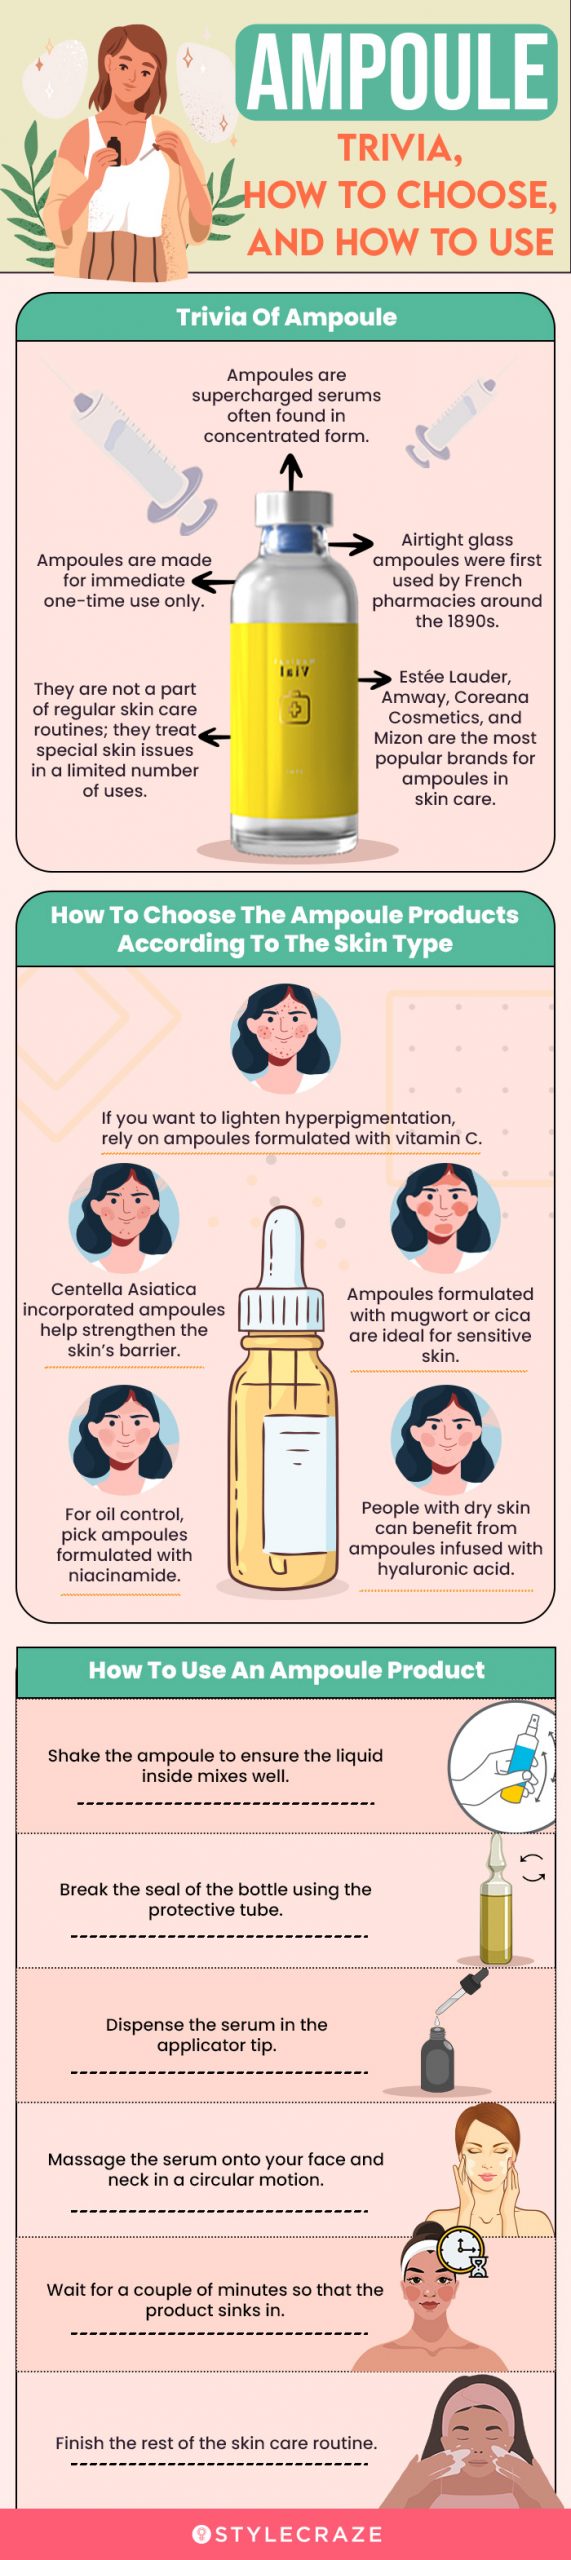 Ampoule: Trivia, How To Choose, And How To Use [infographic]